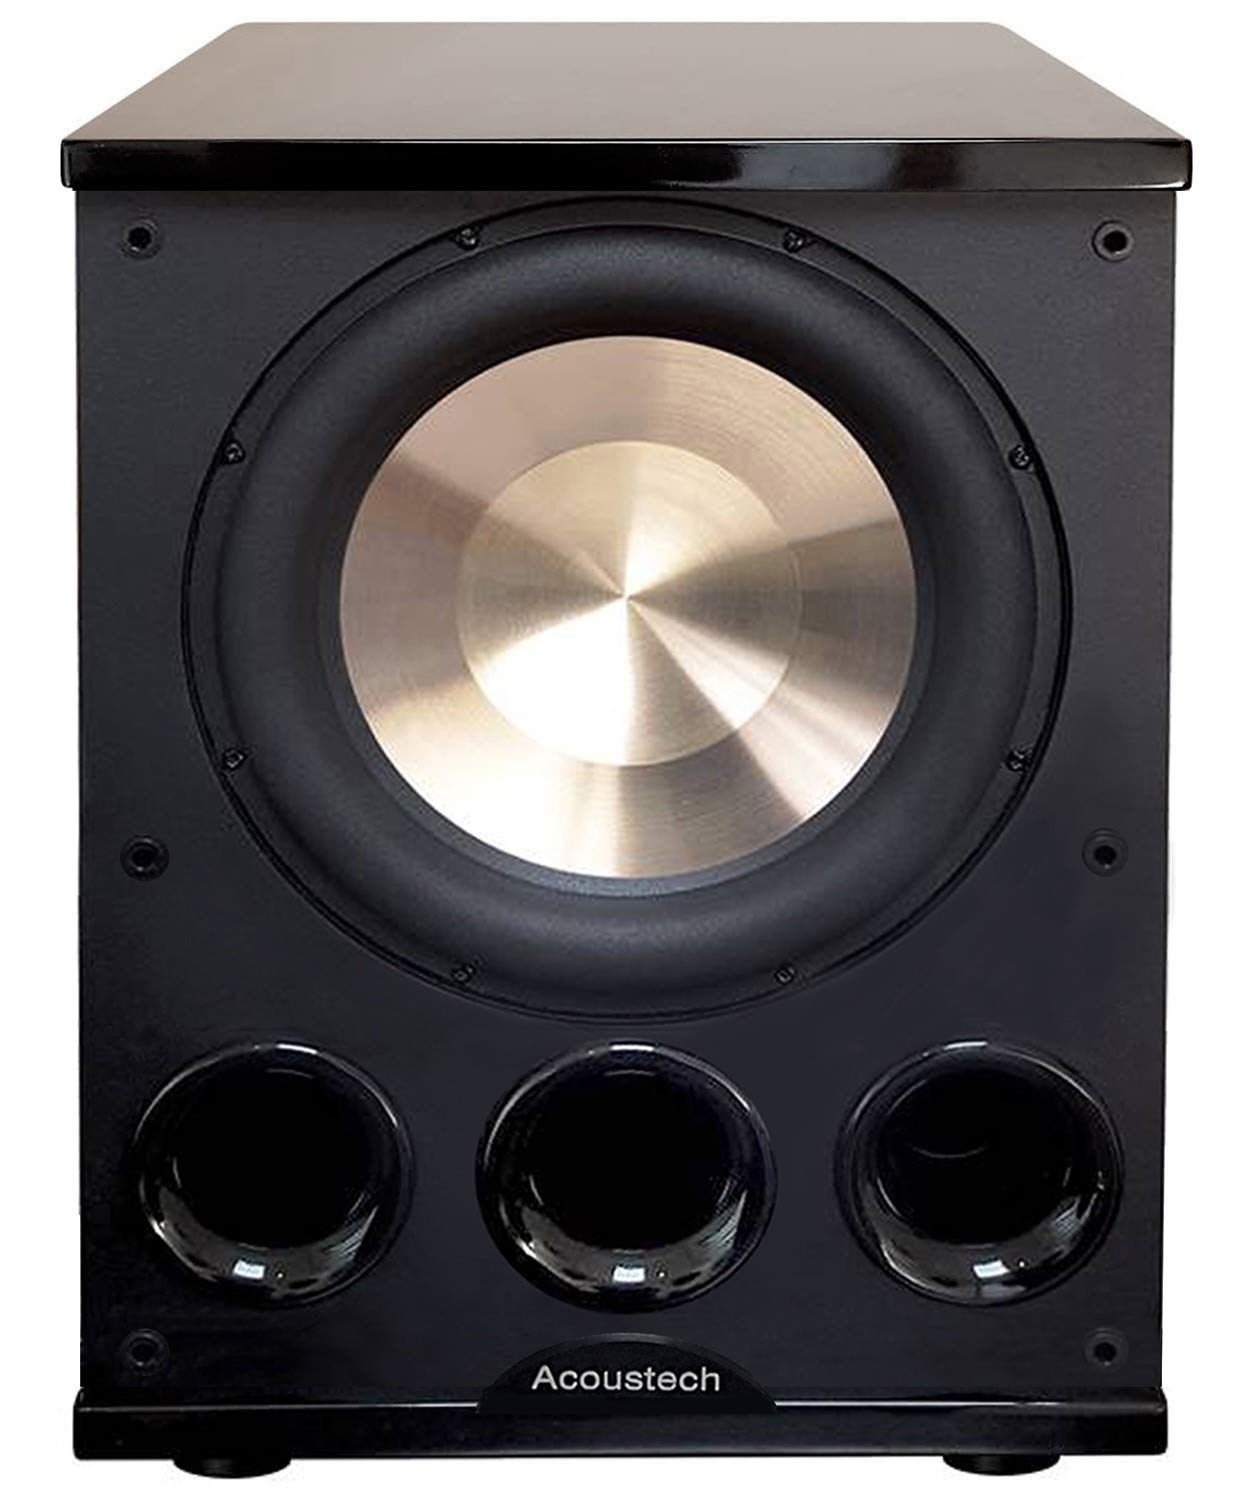 B I c Acoustech Elite Series PL-300 12 inch Powered Subwoofer-1400W with Tri-Tuned Ports and BASS Boost Feature for Room Shaking